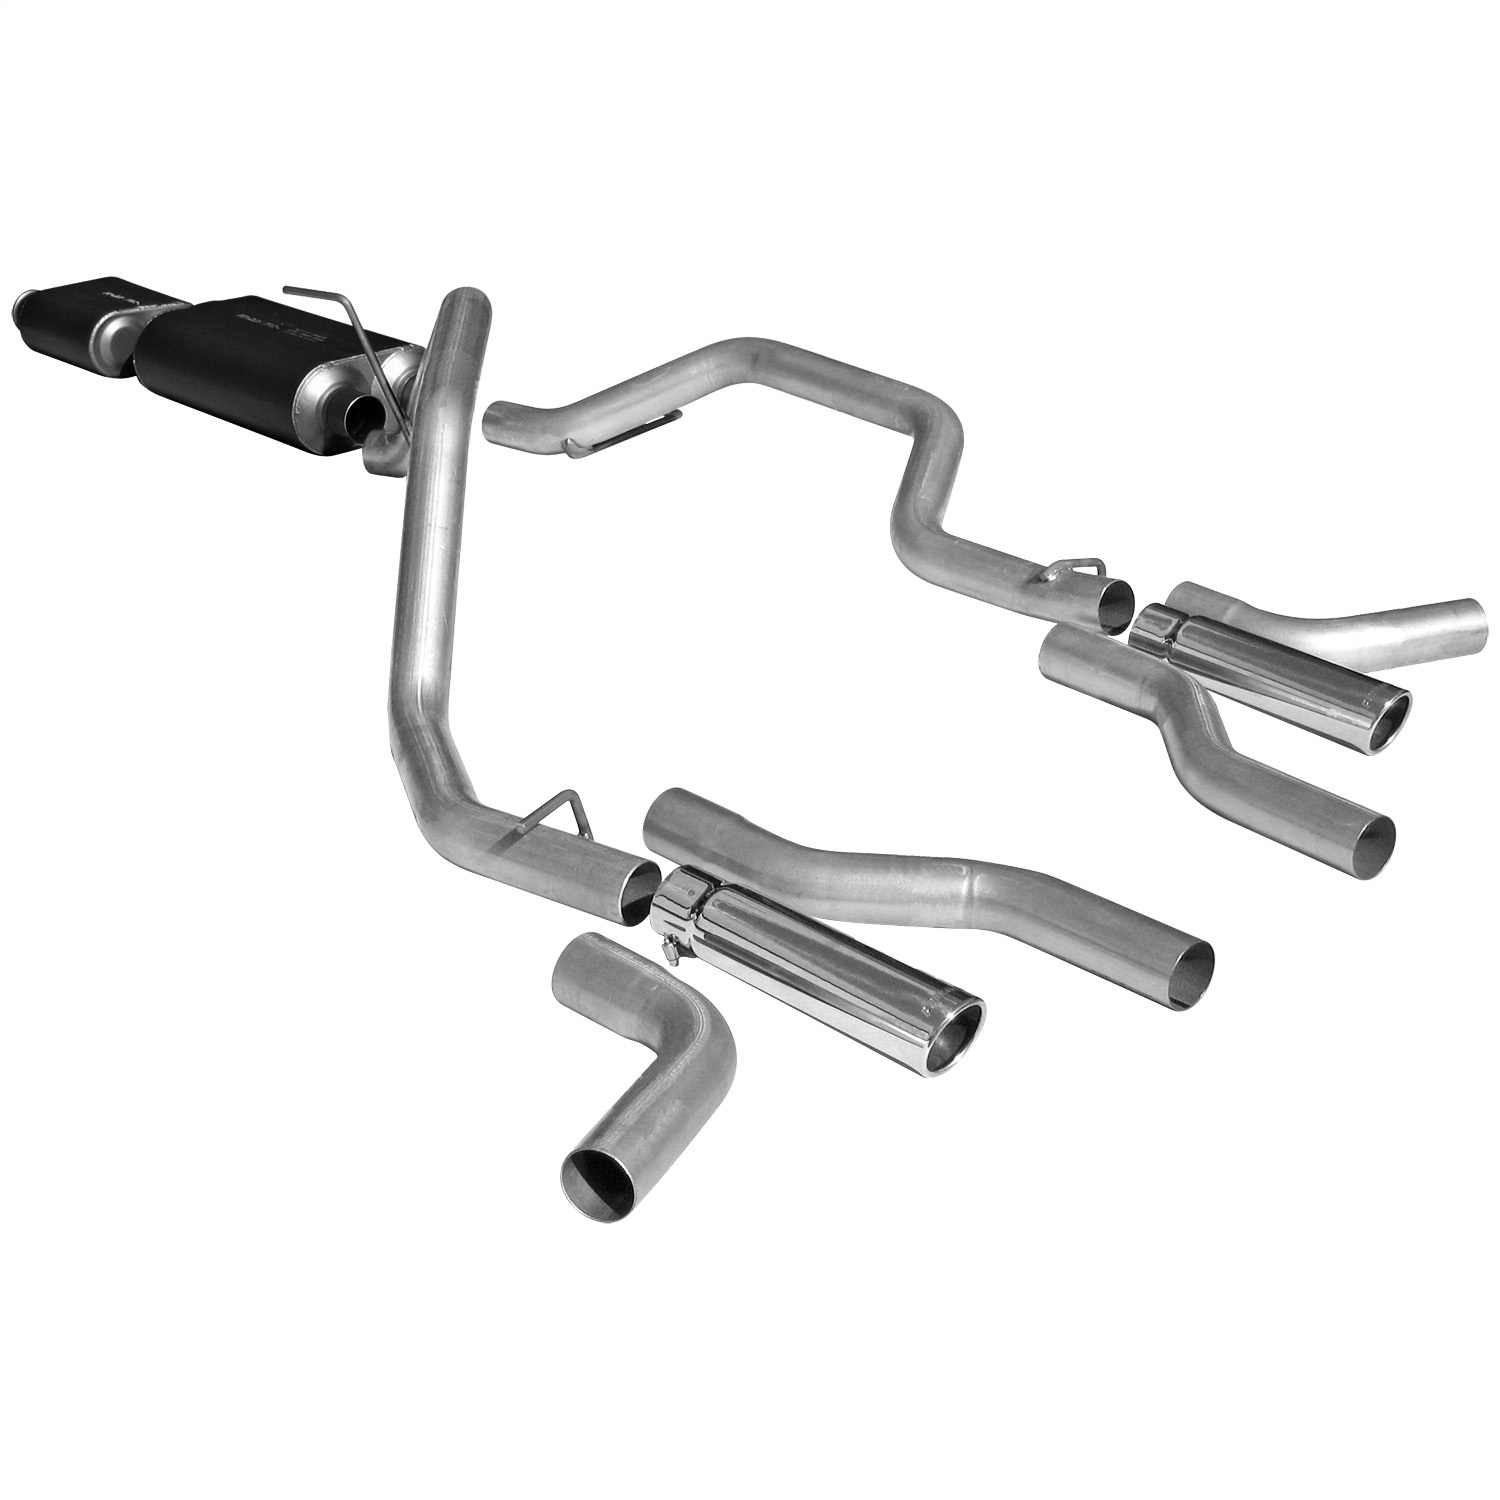 Flowmaster Flowmaster 17425 American Thunder Cat Back Exhaust System Fits 00-06 Tundra